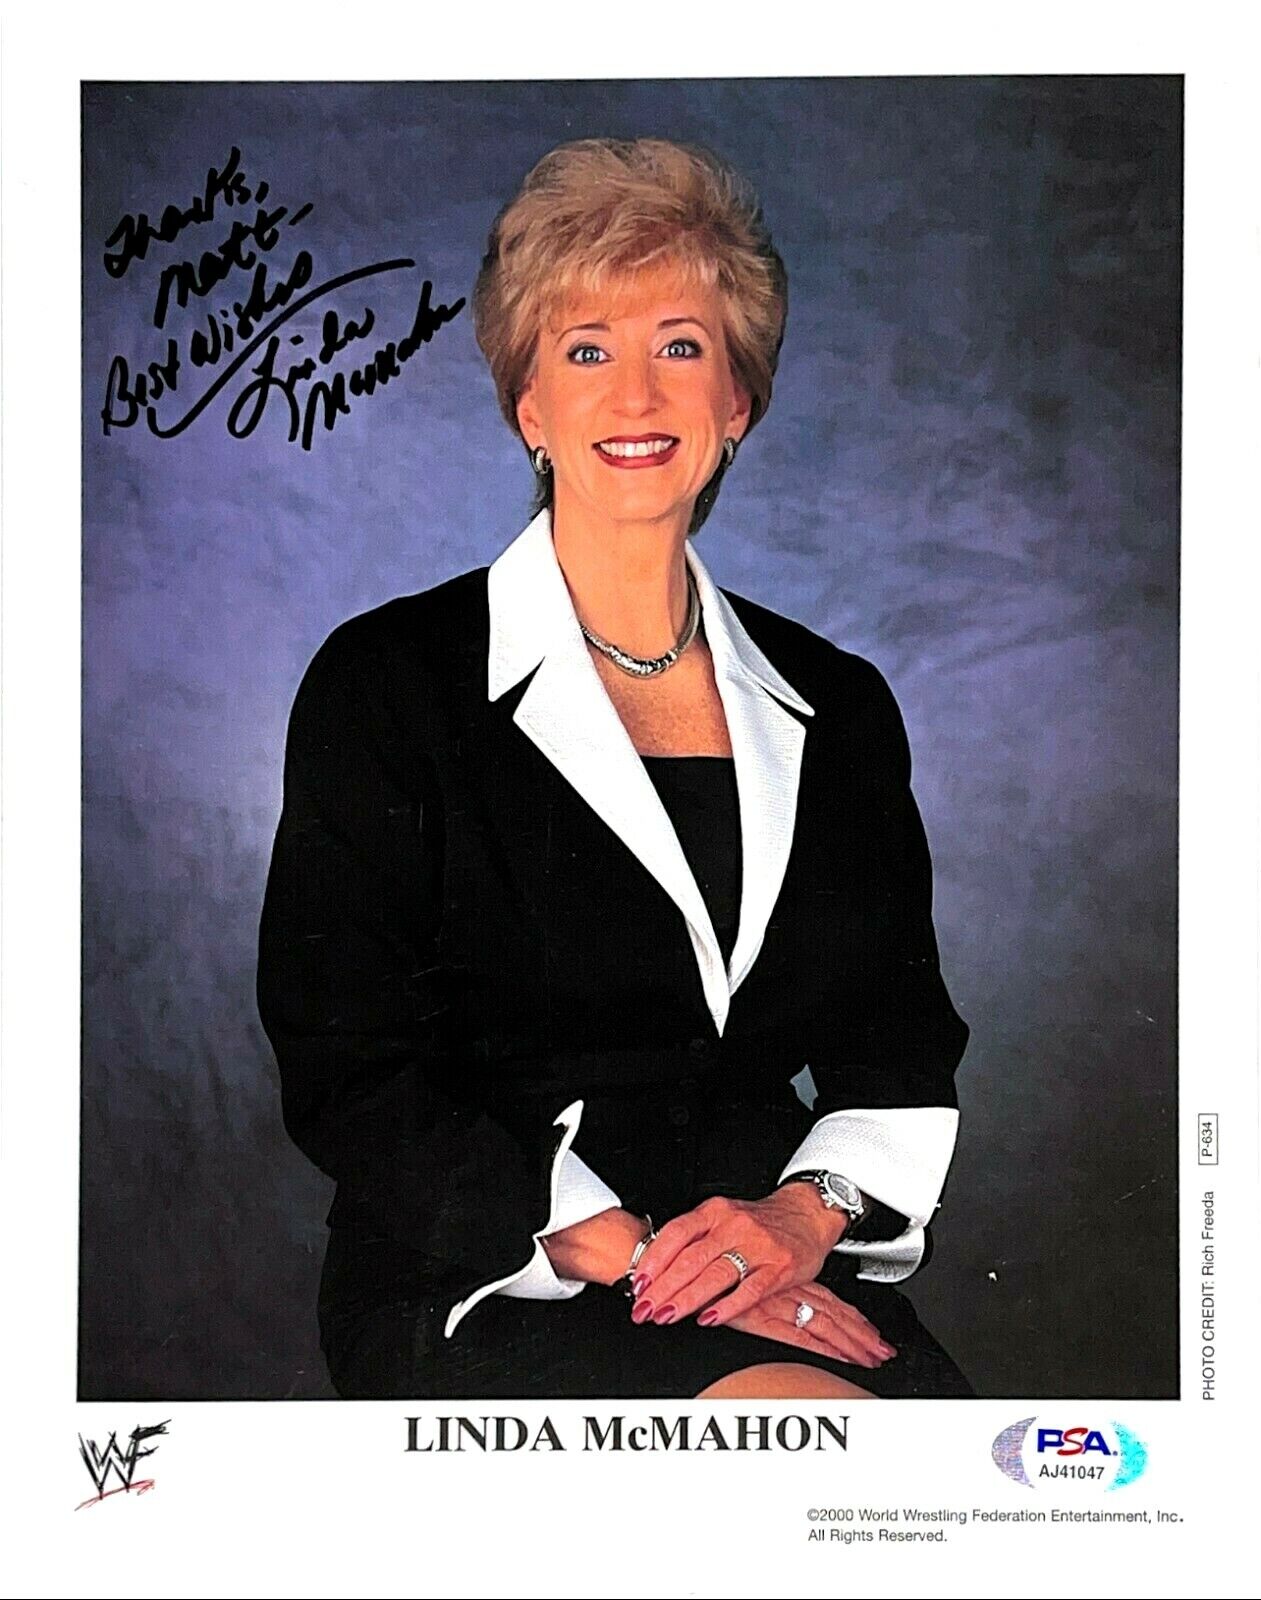 WWE LINDA MCMAHON P-634 HAND SIGNED AUTOGRAPHED 8X10 PROMO Photo Poster painting WITH PSA COA